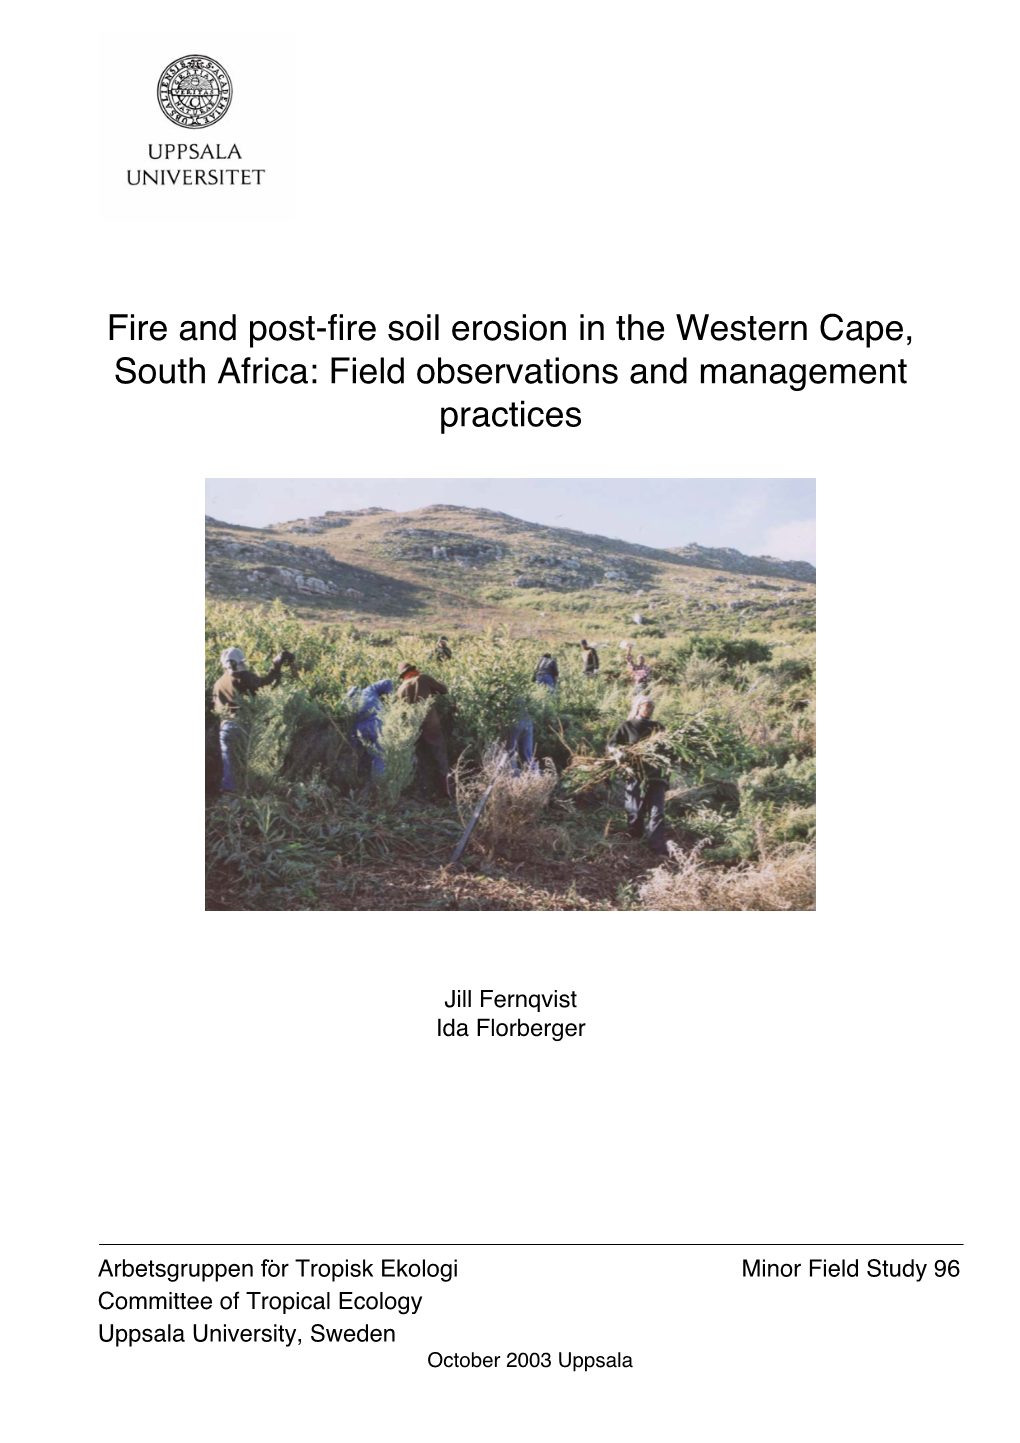 Fire and Post-Fire Soil Erosion in the Western Cape, South Africa: Field Observations and Management Practices